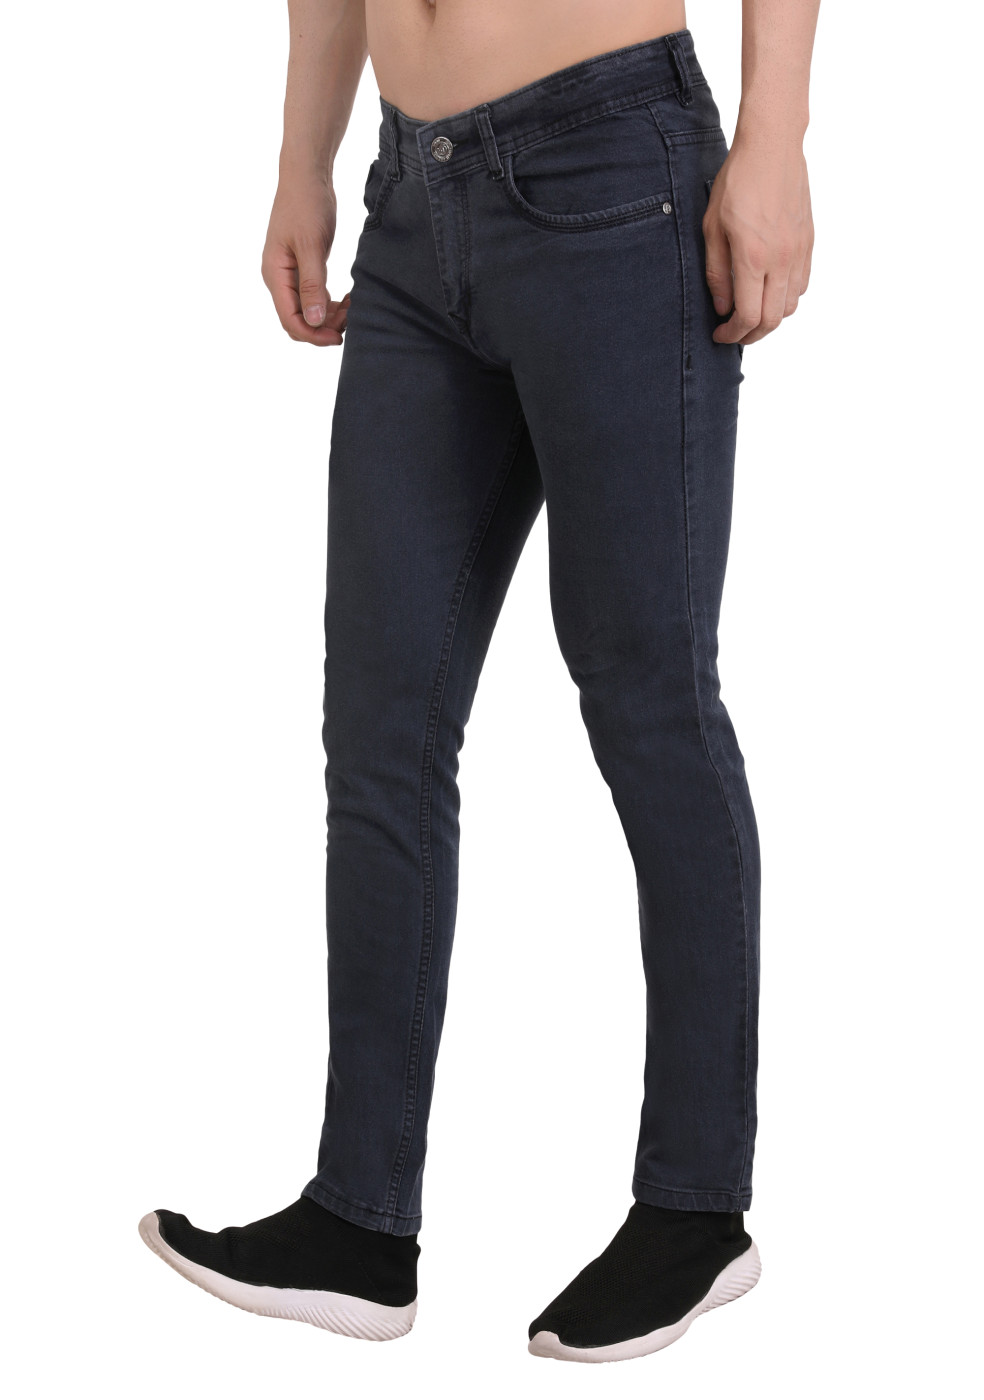 Light Weight Flat Finish Fabric Jeans For Men